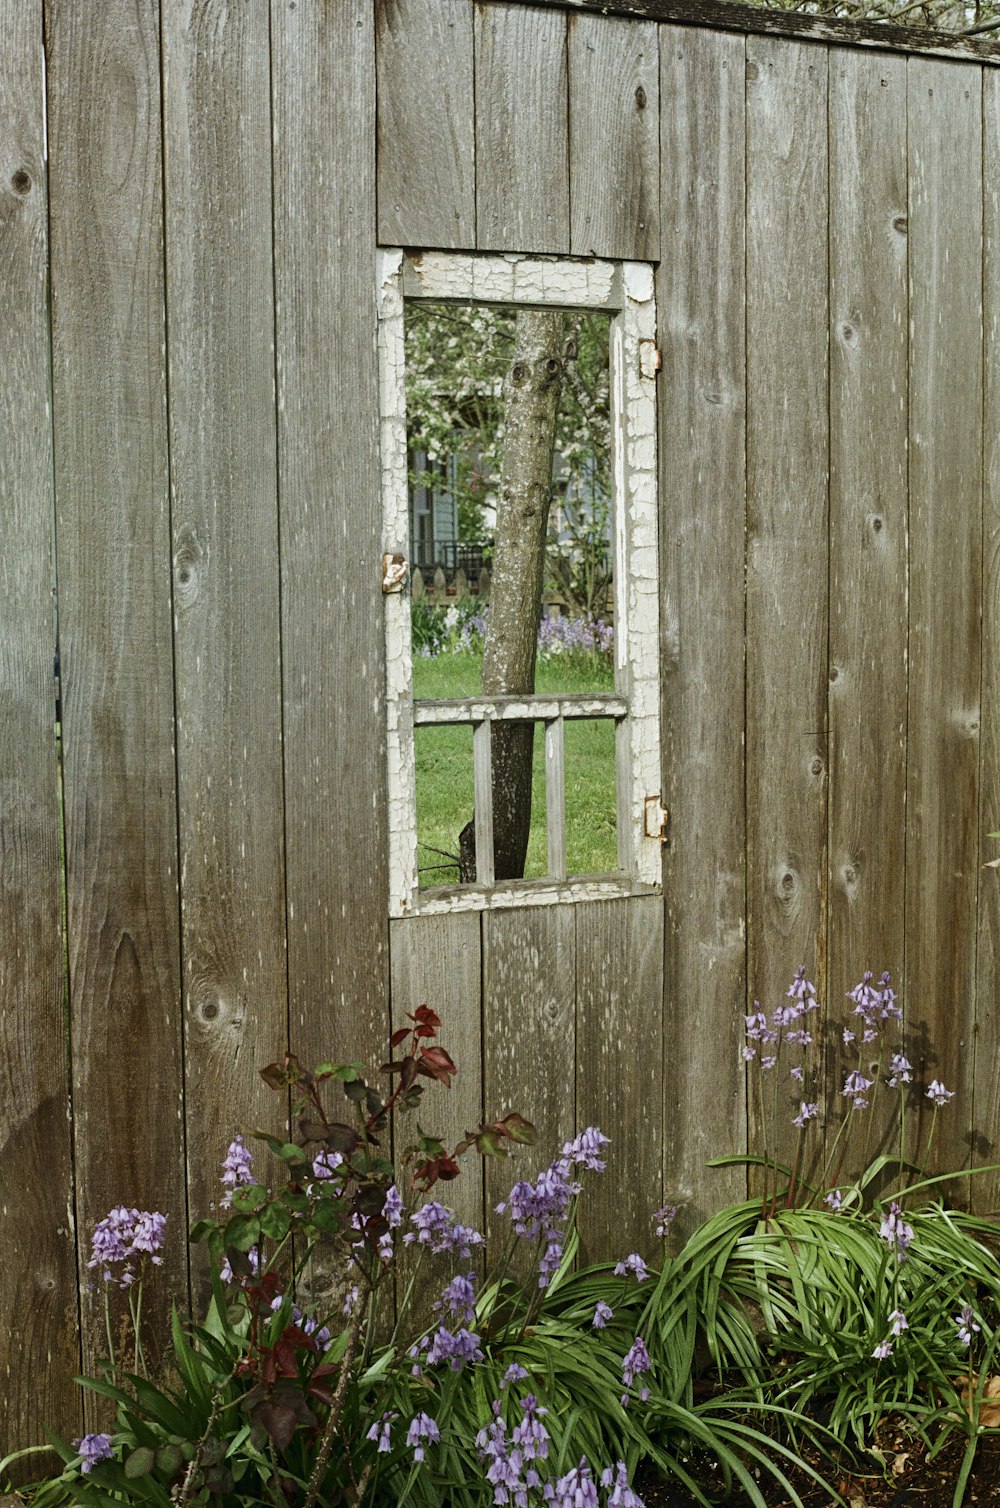 a window in a wooden building